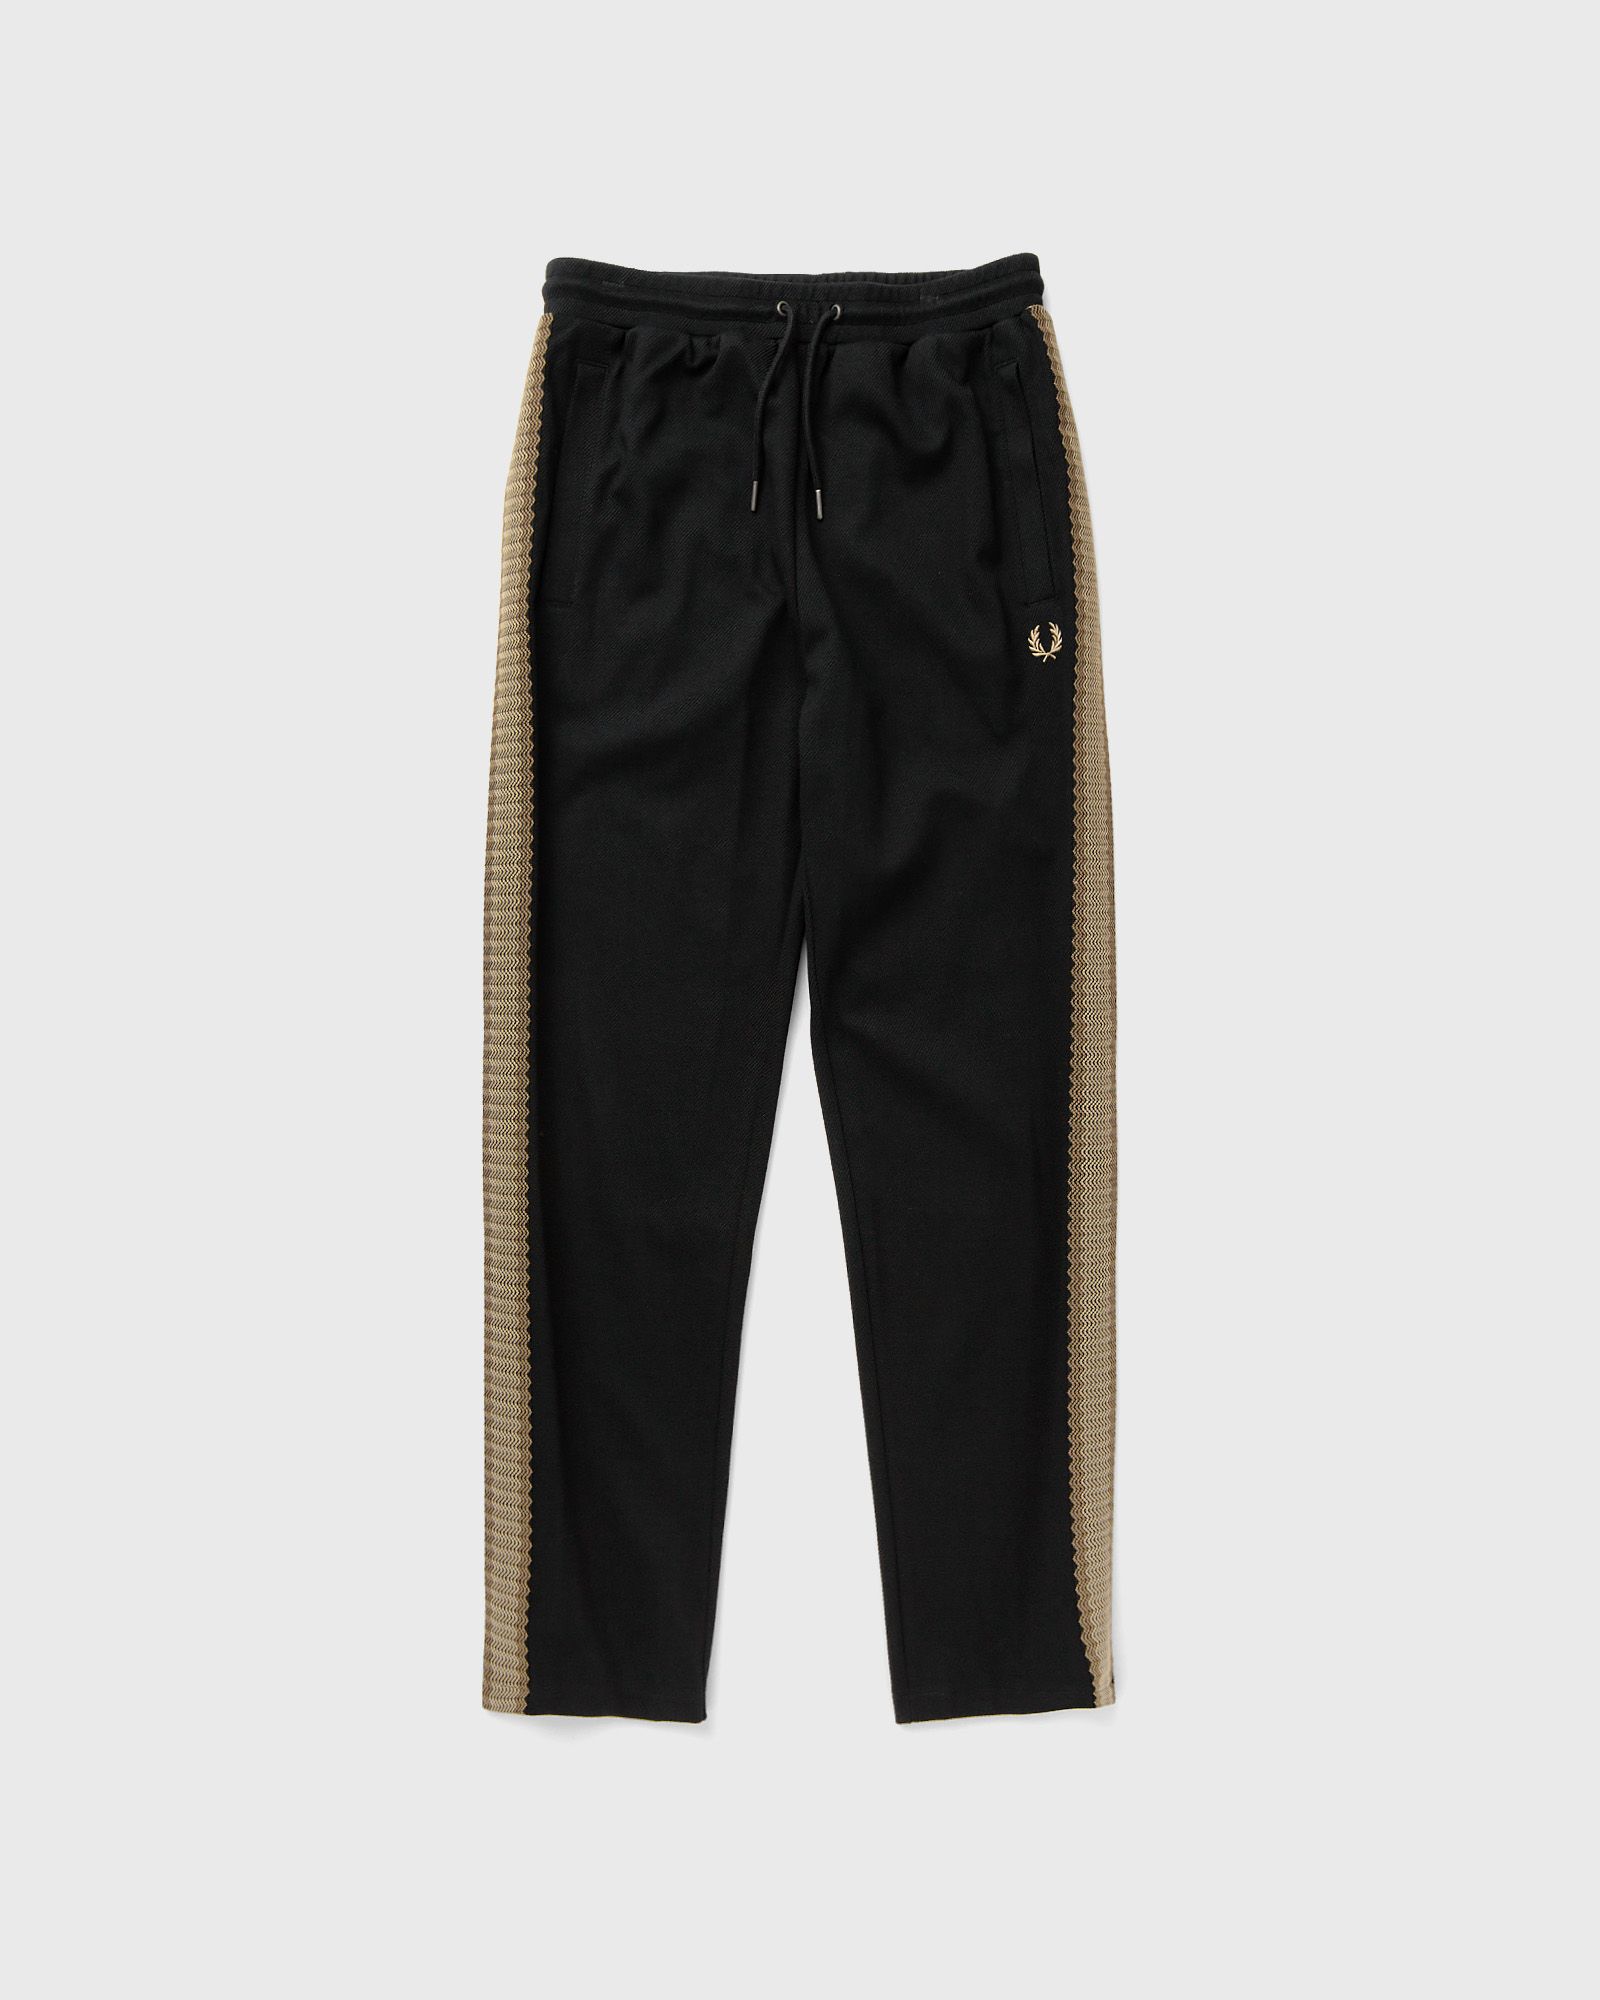 Fred Perry - crochet tape track pant men track pants black in größe:xl